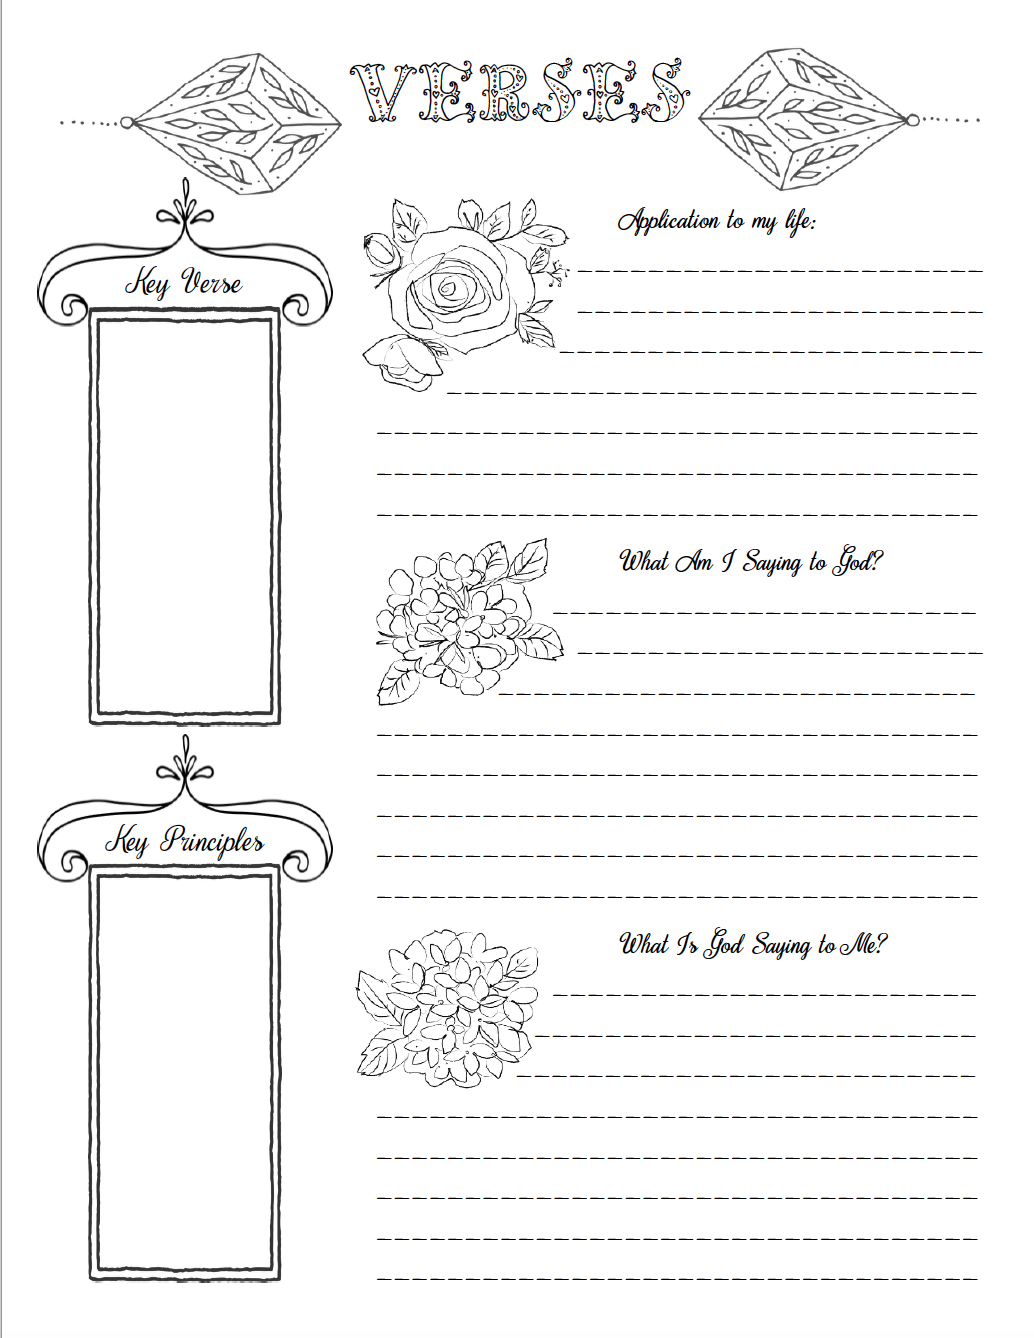 Free Bible Journaling Printables (Including One You Can Color!) - Free Printable Bible Study Journal Pages